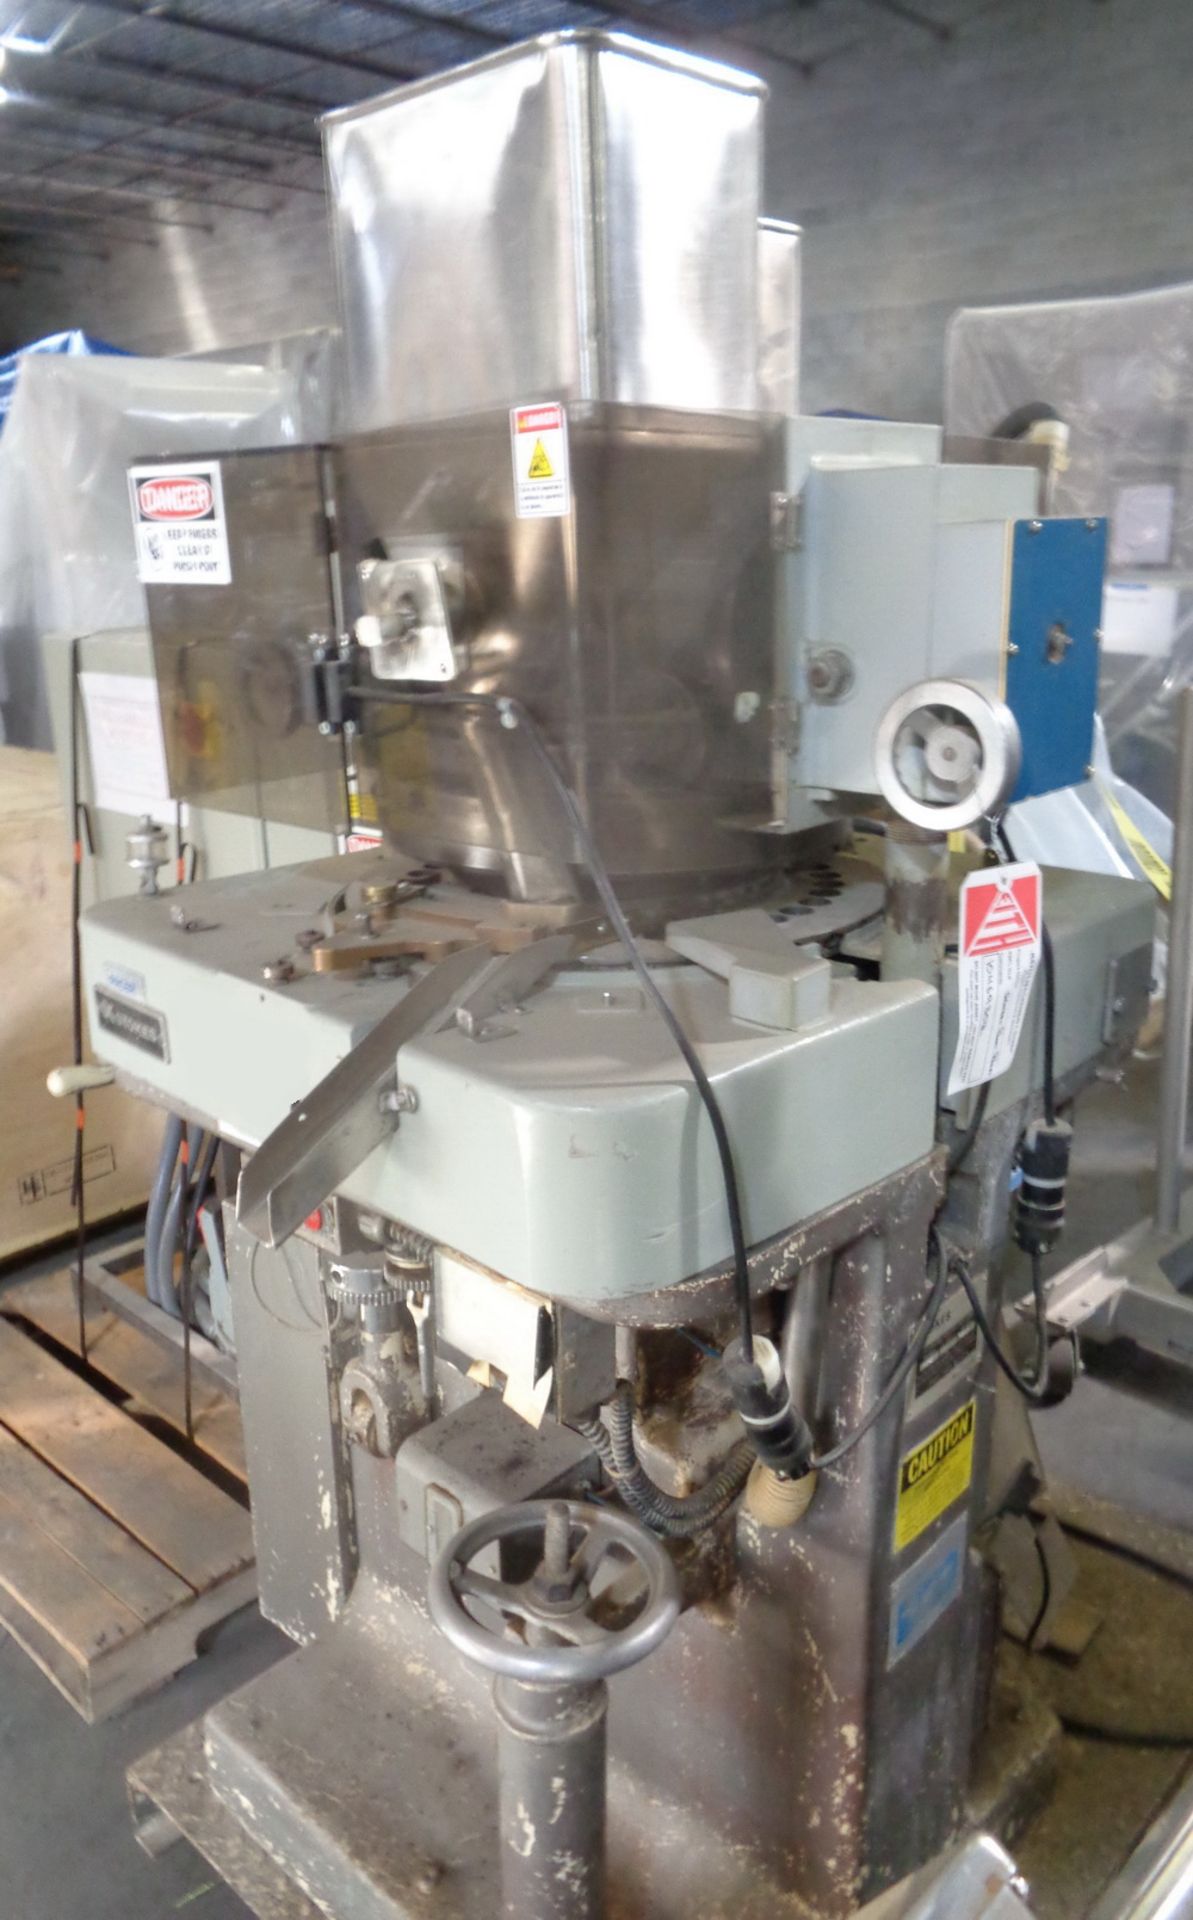 Stokes 35 Station Rotary Tablet Press, Model 555-2 (Pacer Press), S/N 792013 - Image 2 of 7